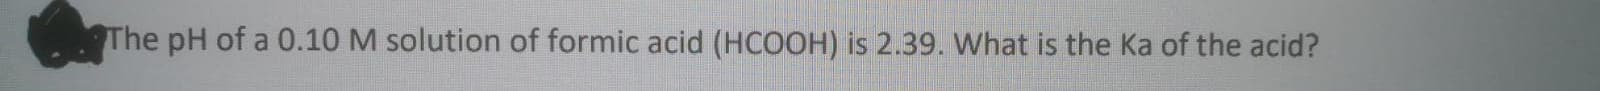 The pH of a 0.10 M solution of formic acid (HCOOH) is 2.39. What is the Ka of the acid?
